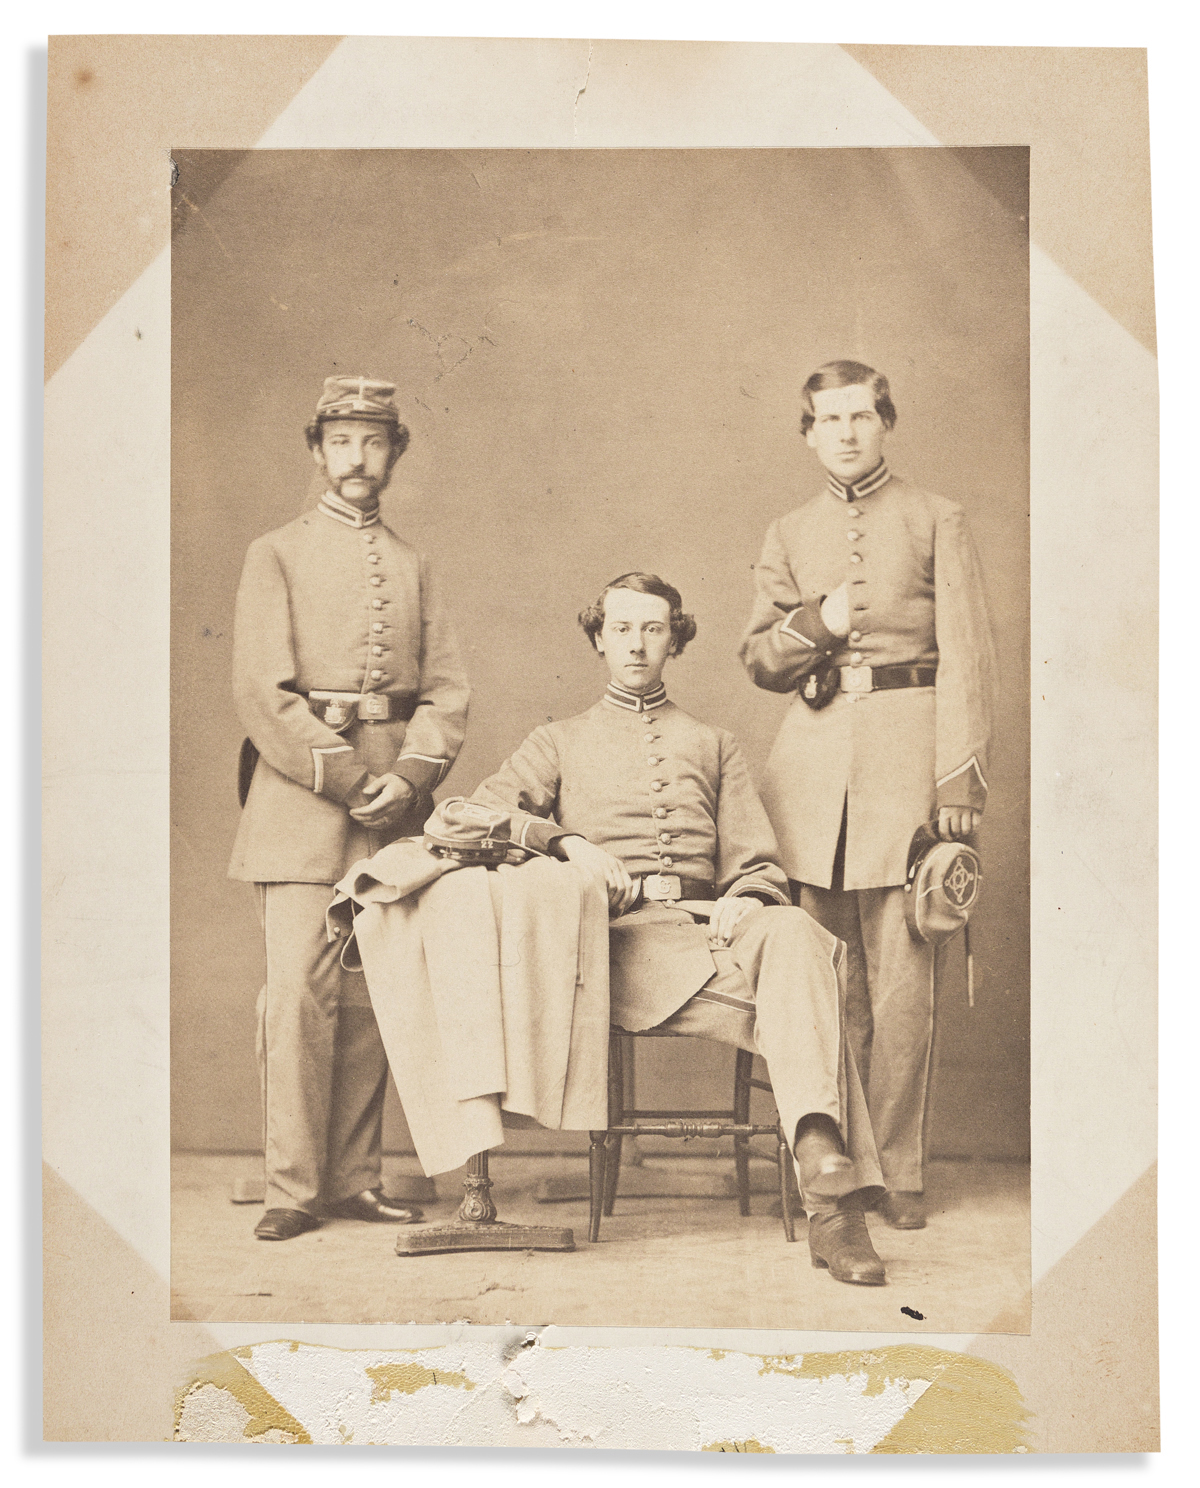 (CIVIL WAR--NEW YORK.) Portrait said to be the Hyde brothers of 22nd Regiment, New York National Guard.